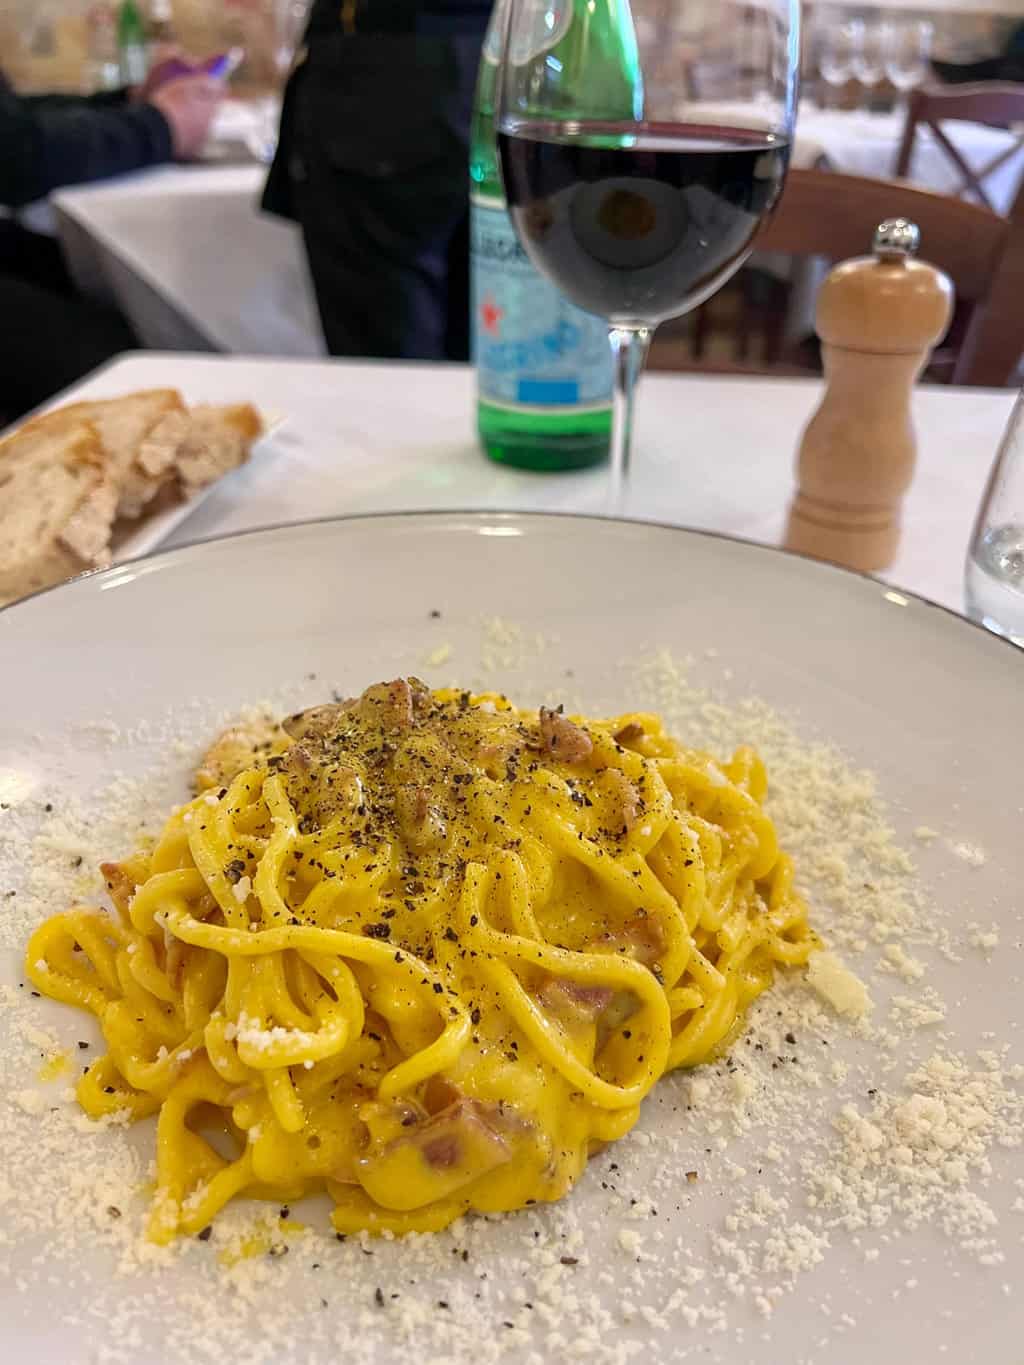 A plate of traditional carbonara pasta with a glass of red wine in a restaurant in Rome. Food and wine tour